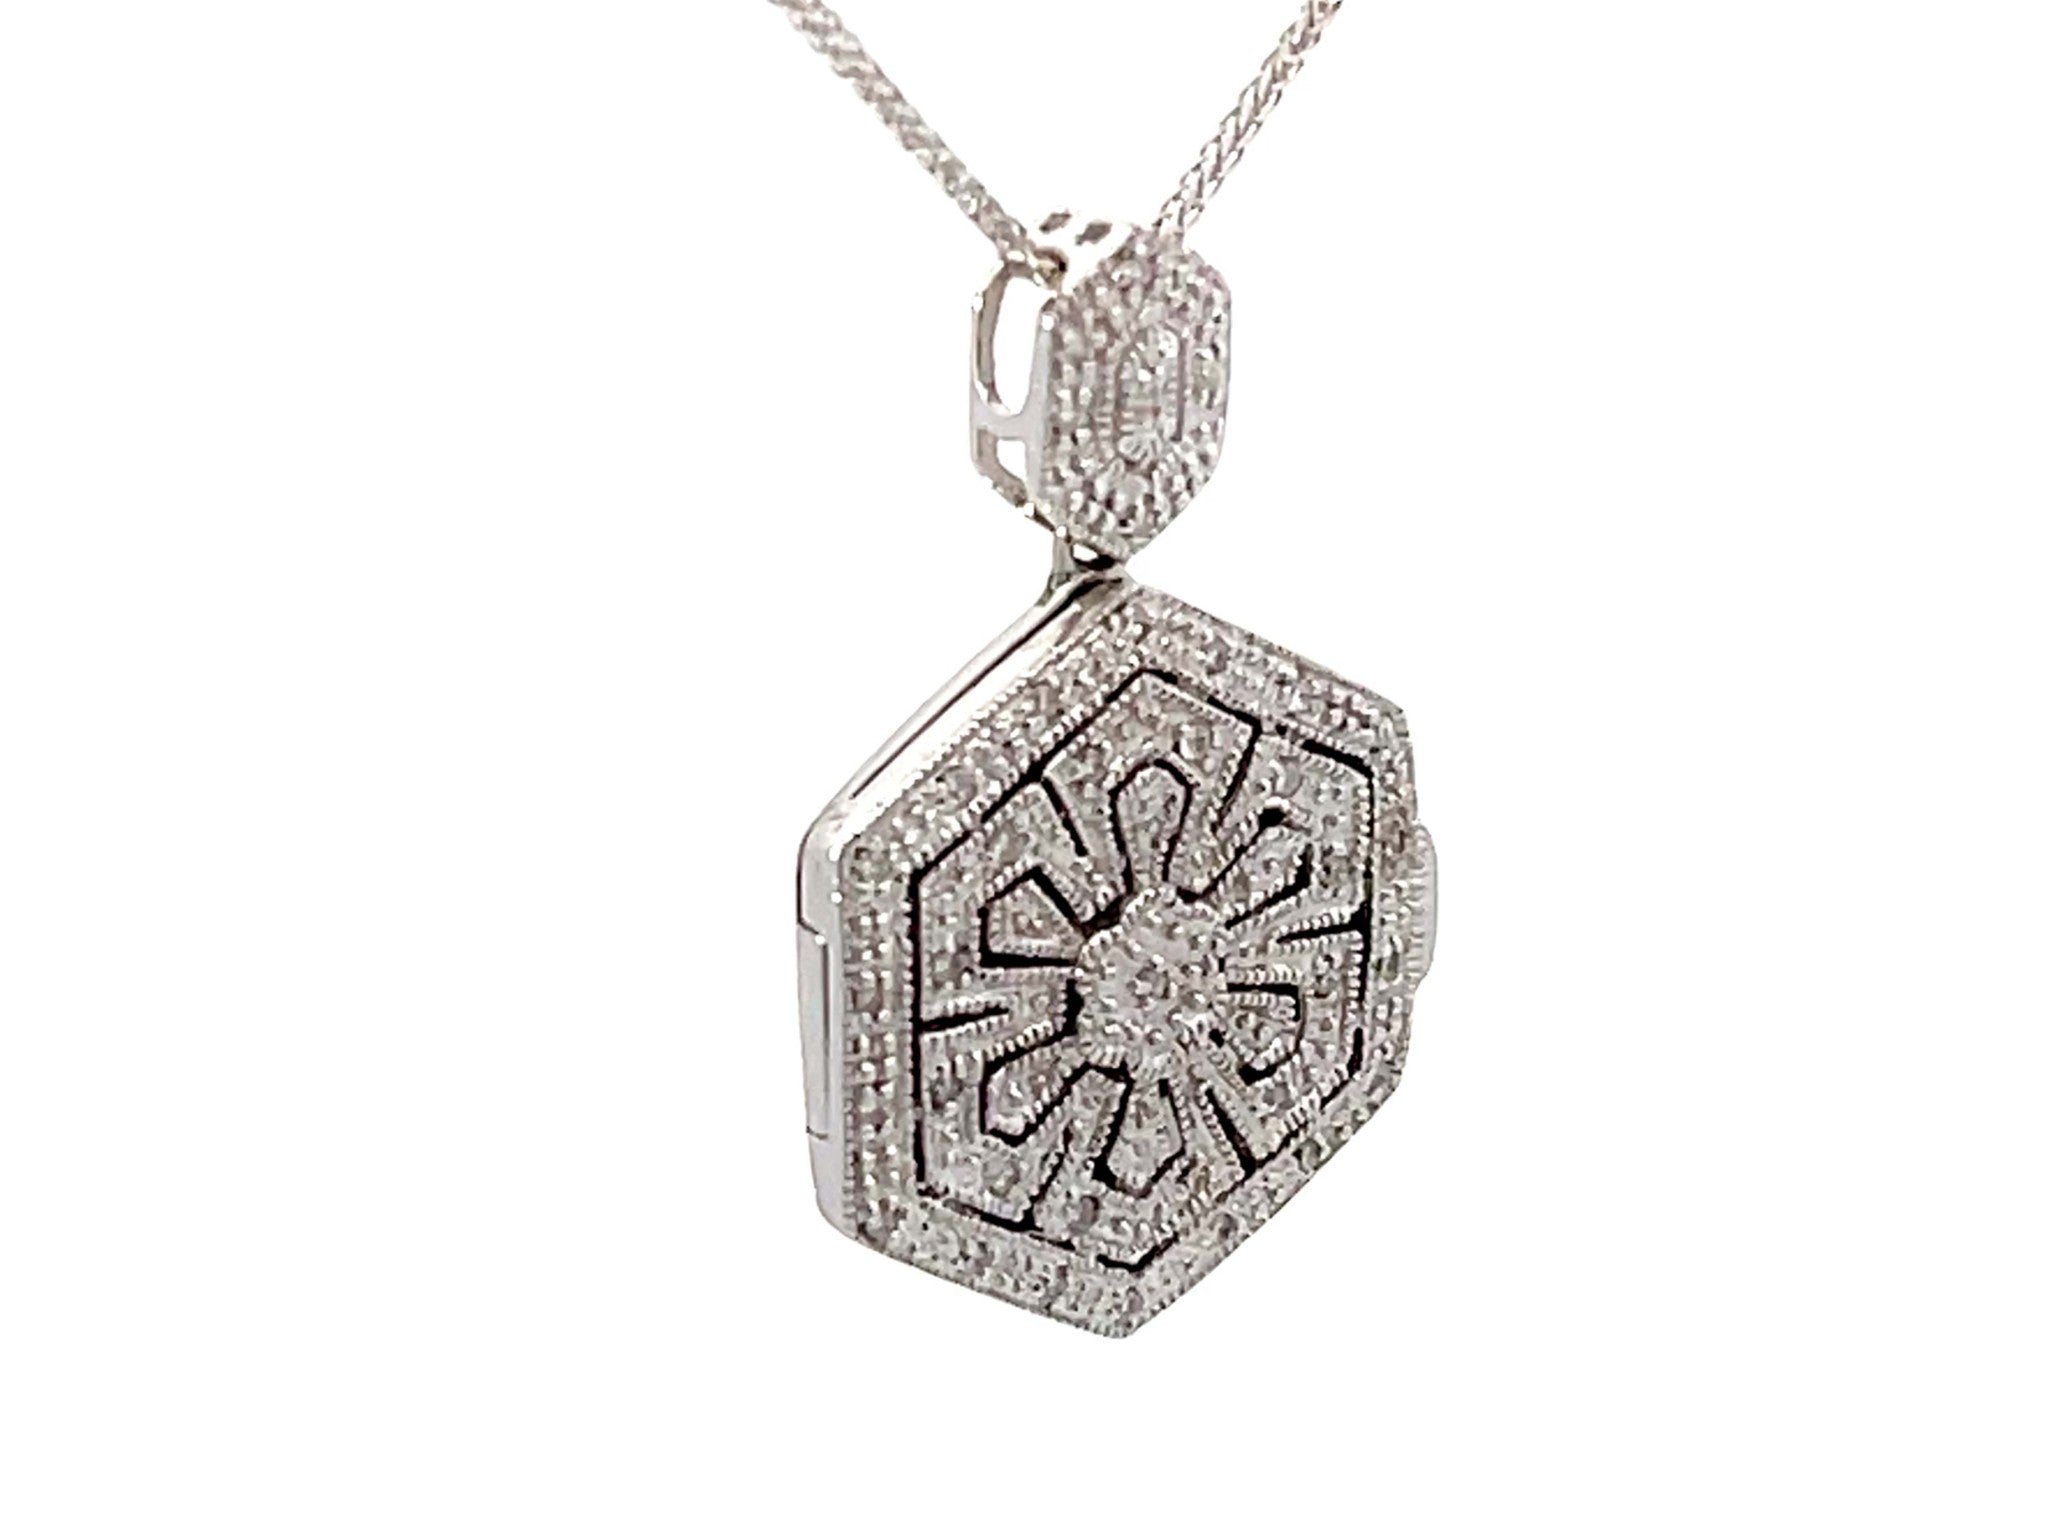 Solid 14K White Gold Hexagon Shaped Diamond Pendant and Chain